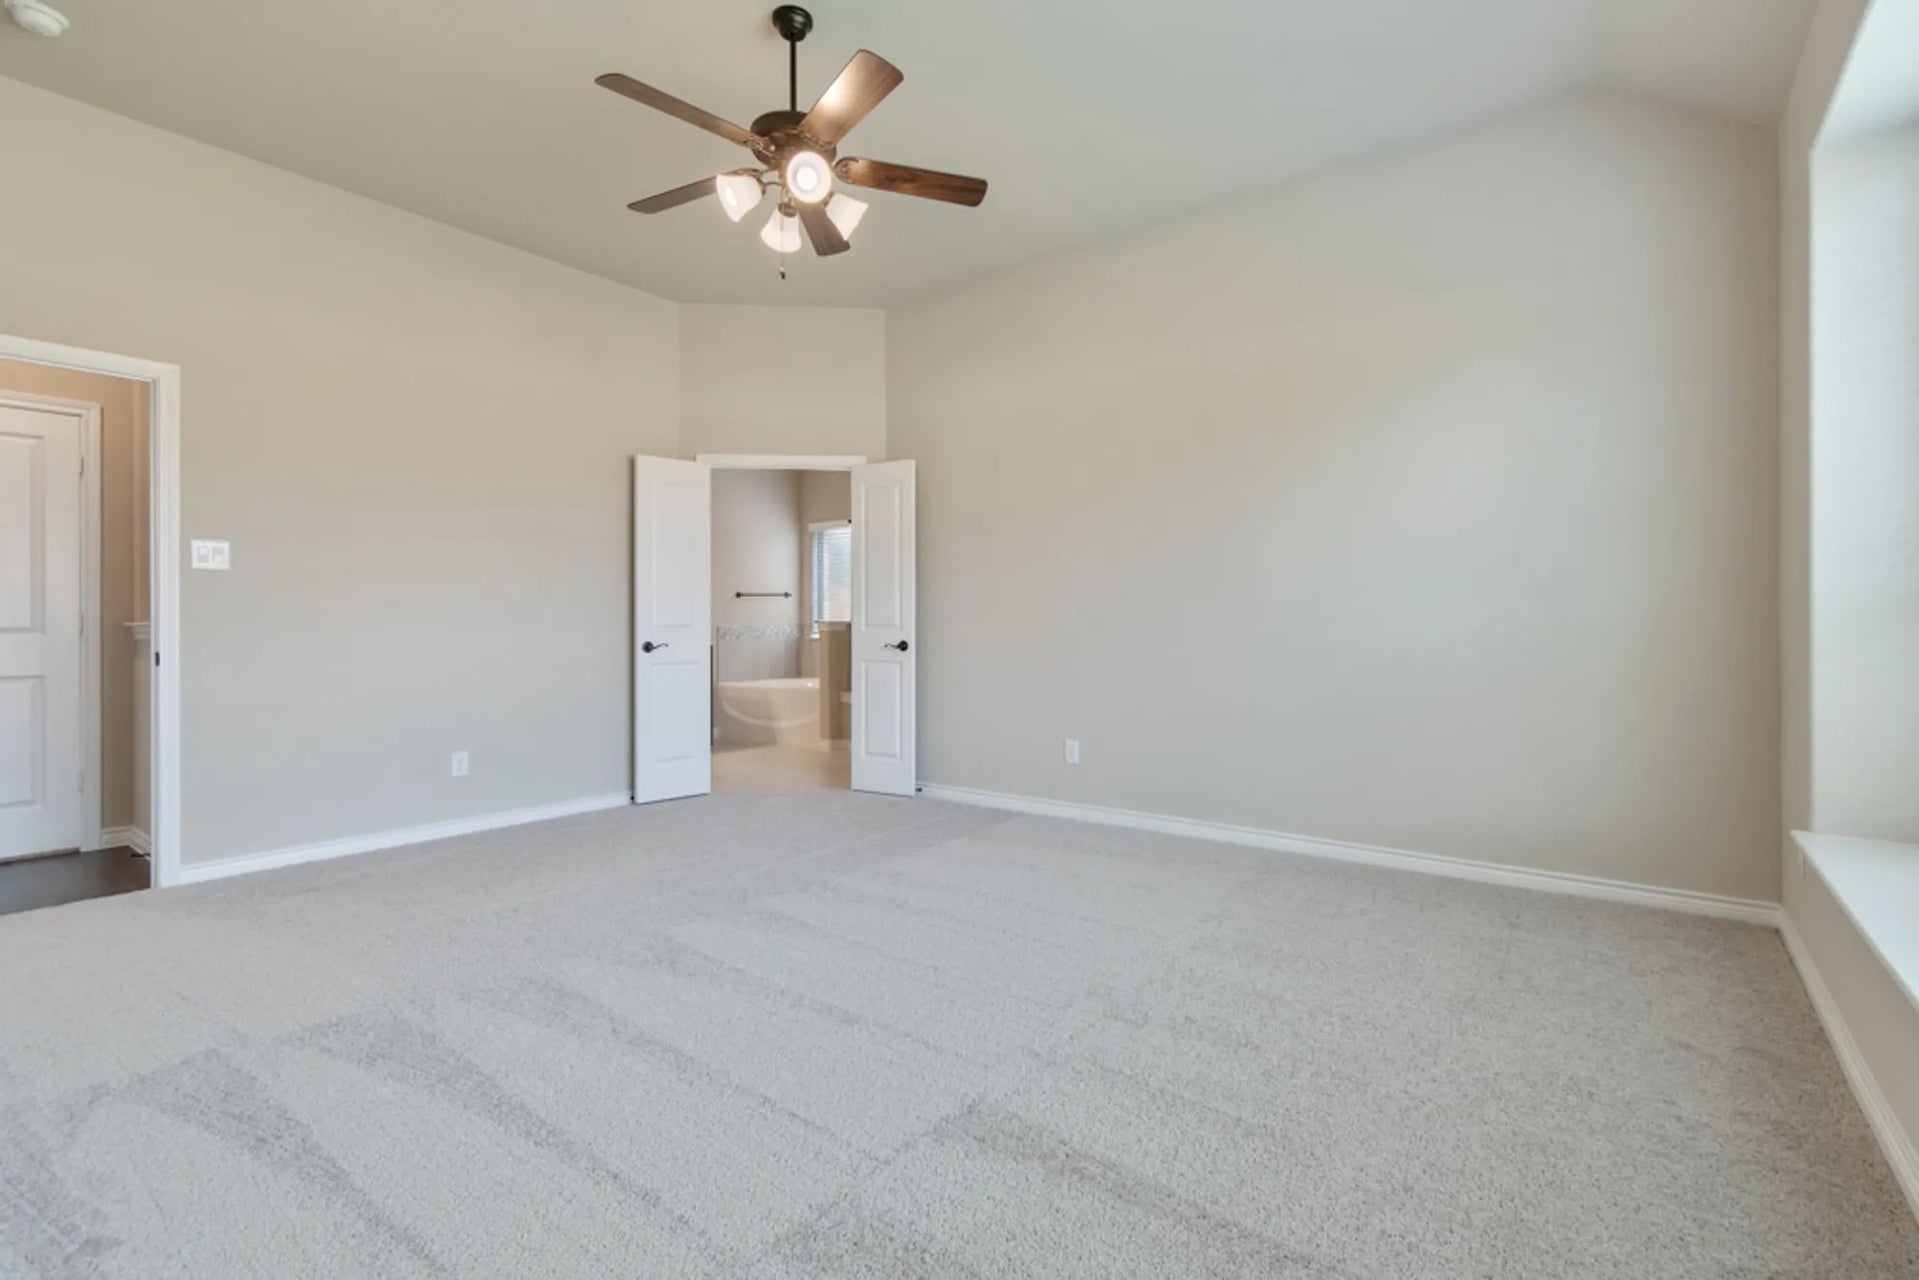 4br New Home in Cleburne, TX